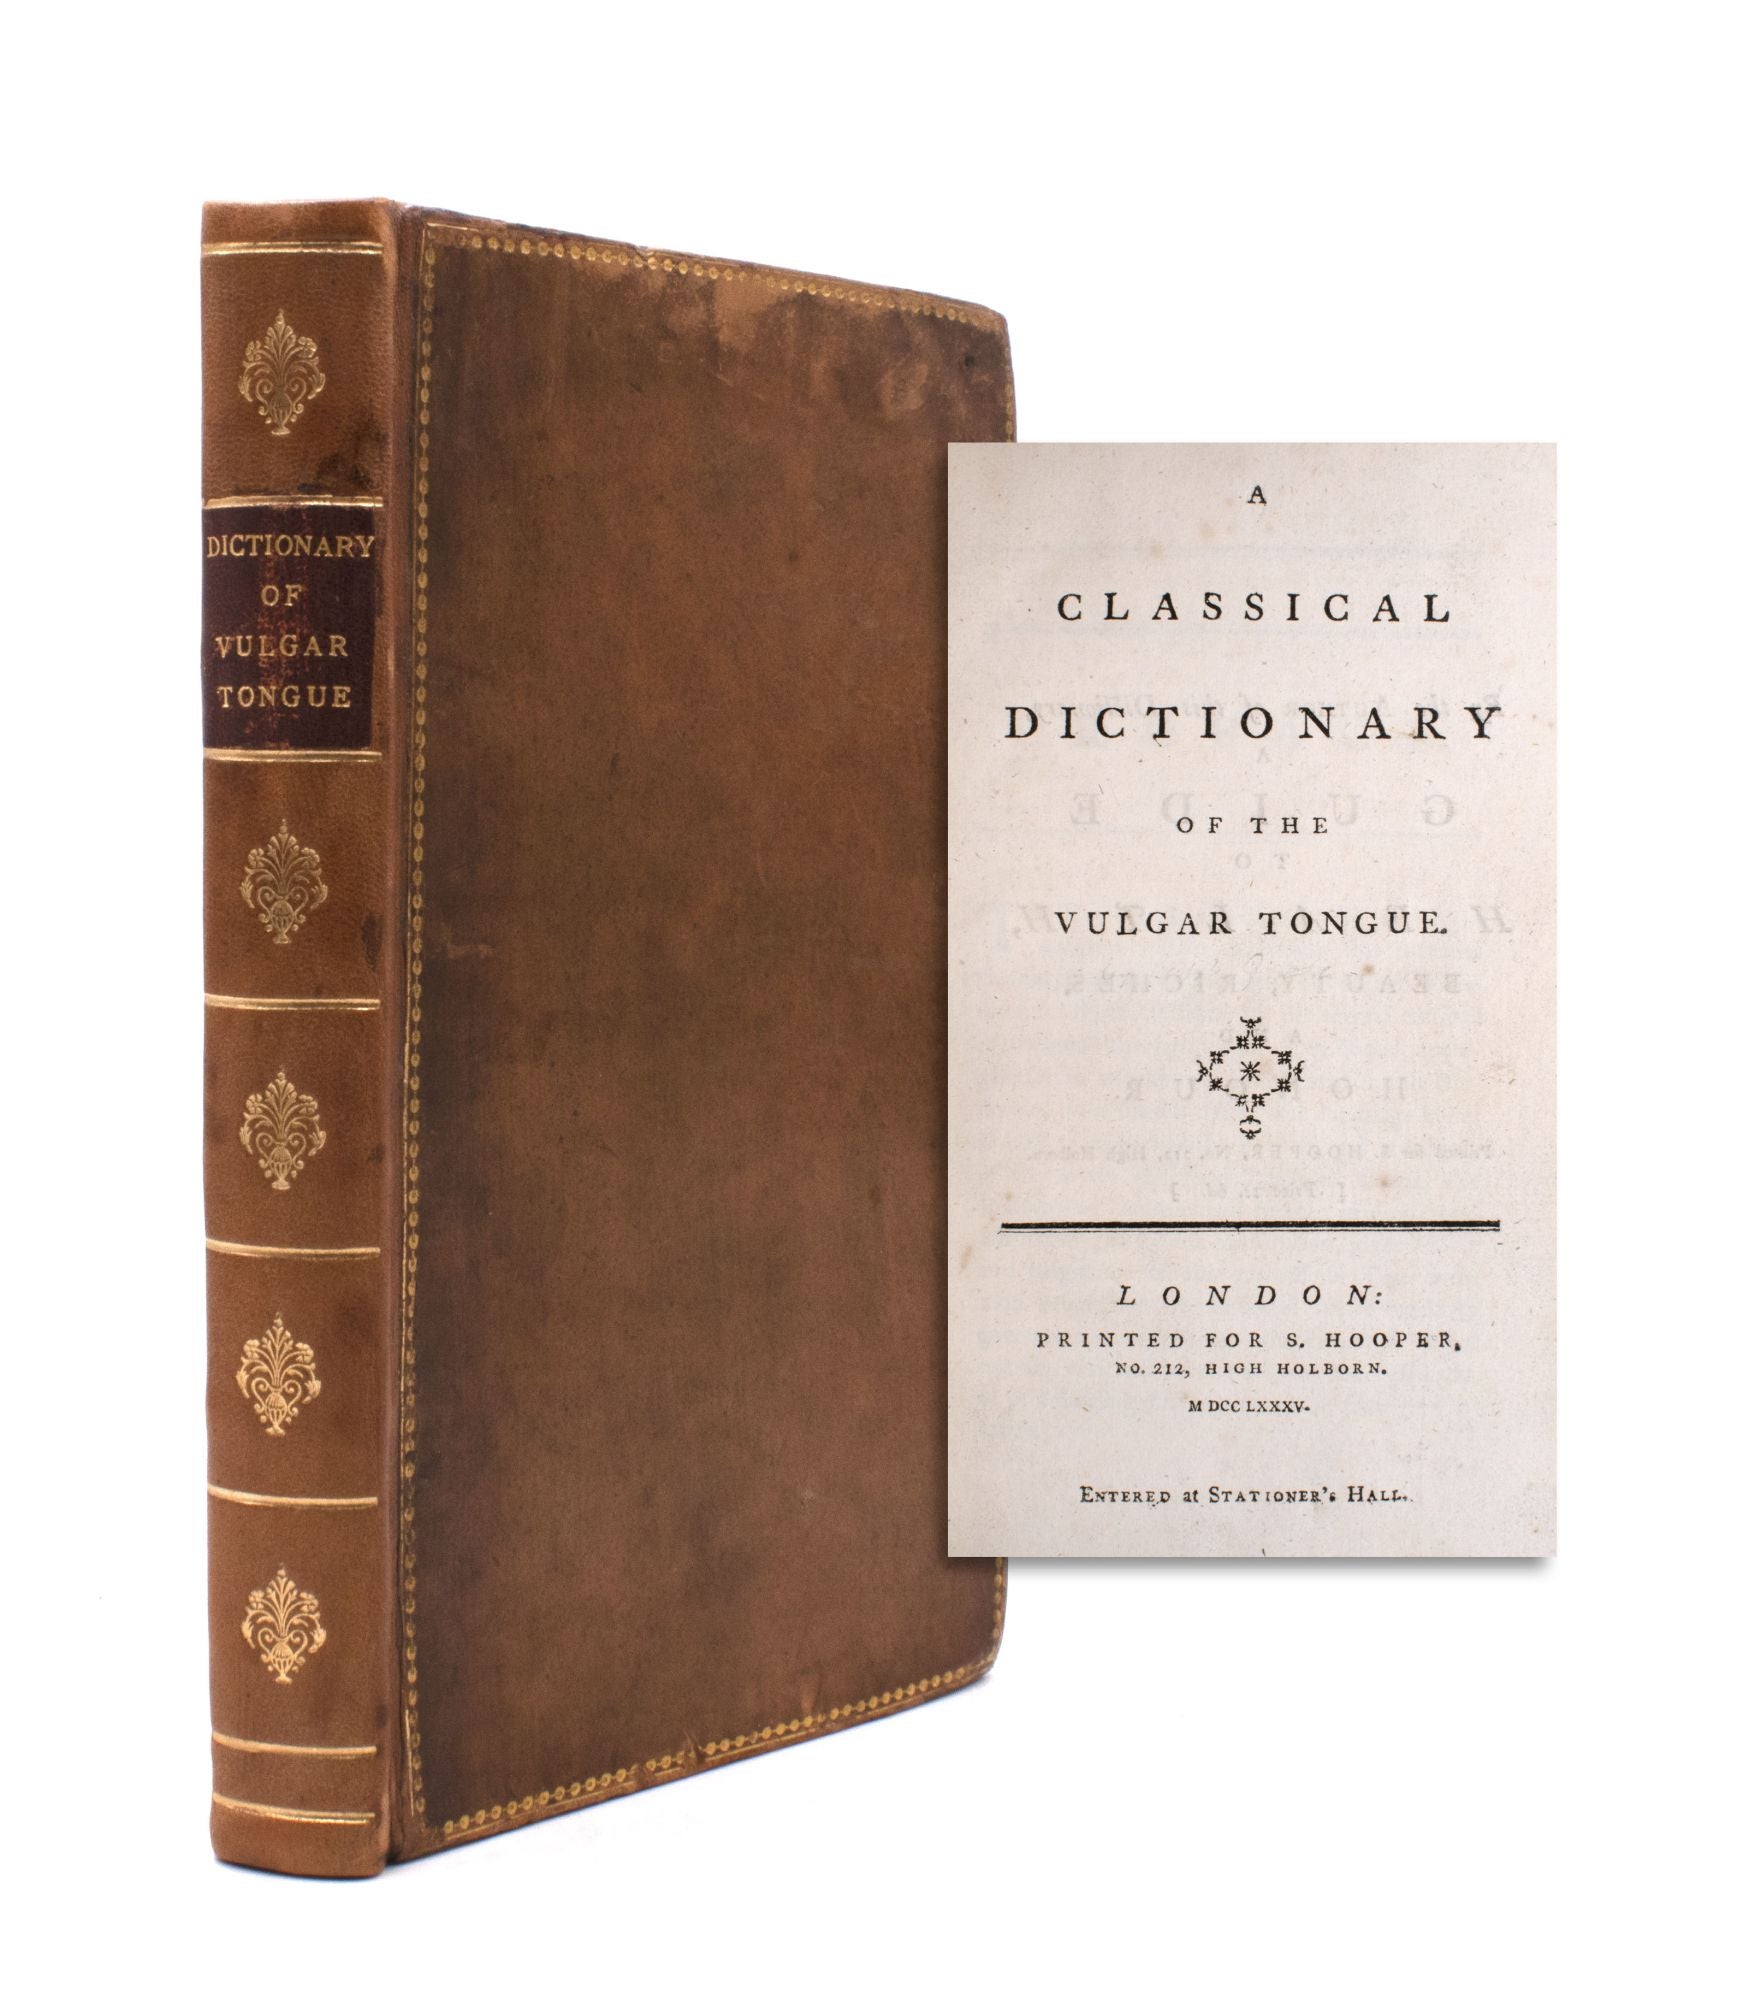 A Classical Dictionary Of The Vulgar Tongue Francis Grose The First Edition 